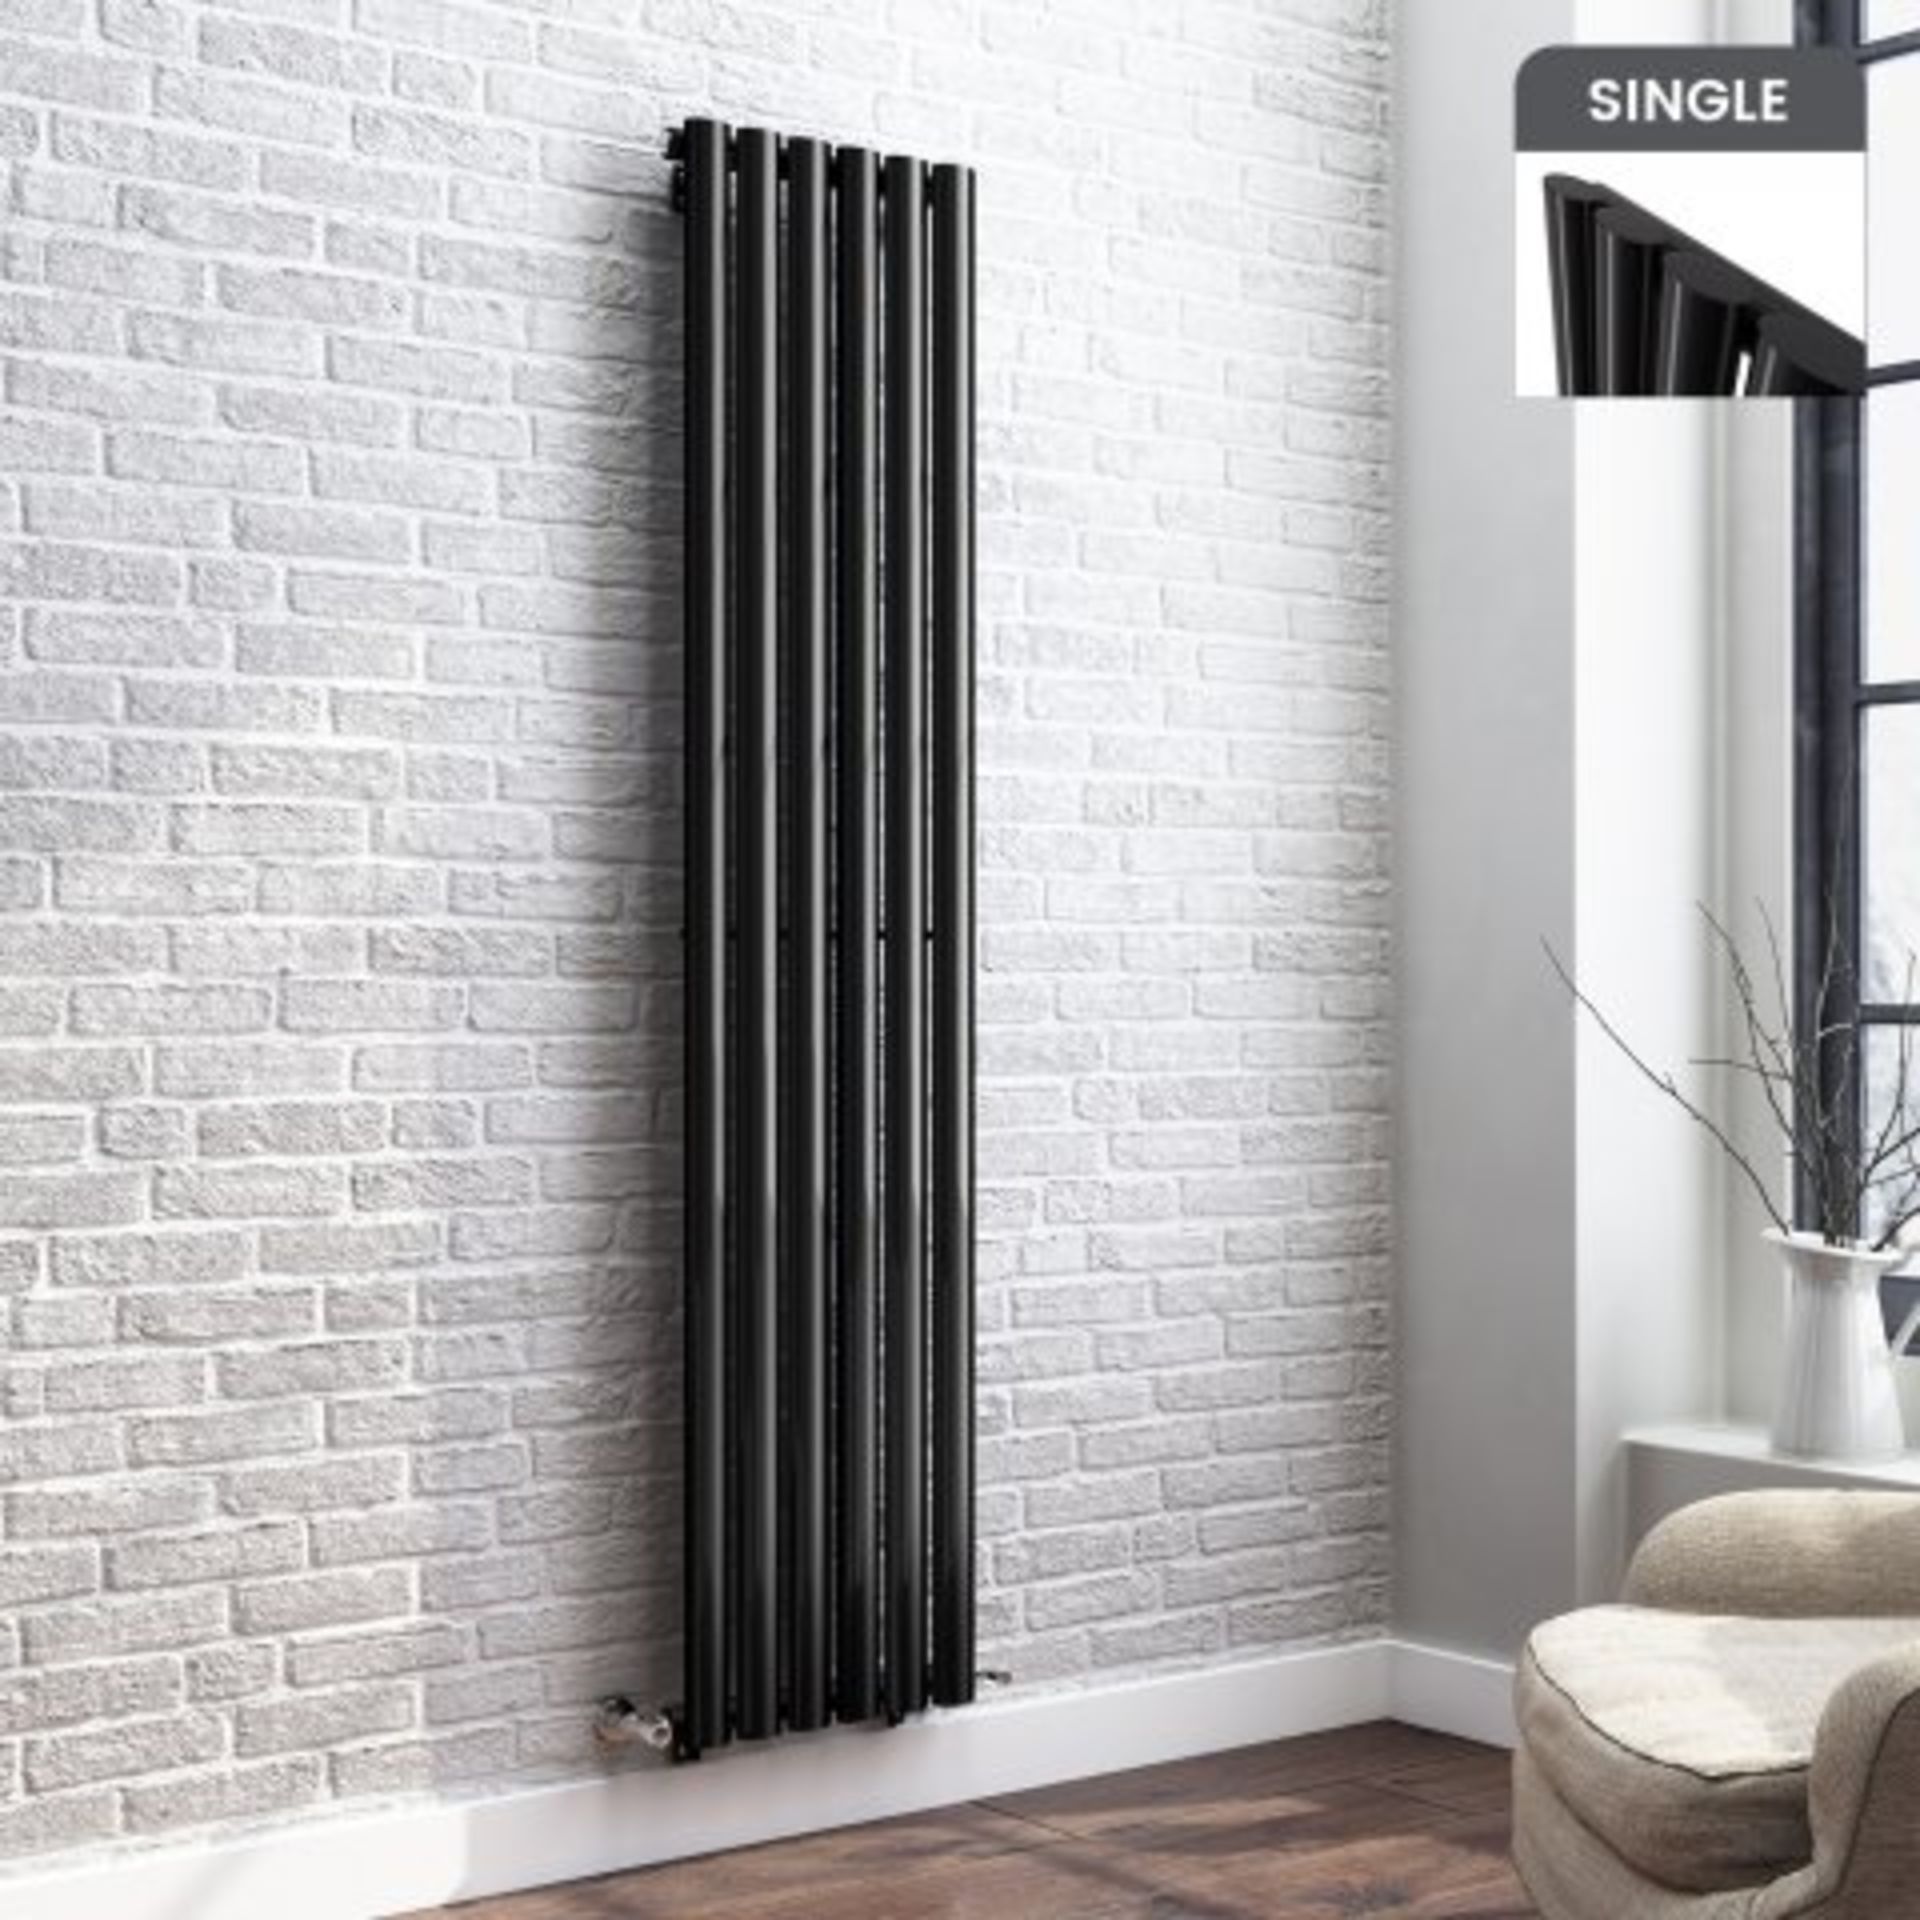 (O123) 1600x360mm Gloss Black Single Oval Tube Vertical Radiator. RRP £191.98. Want to add a